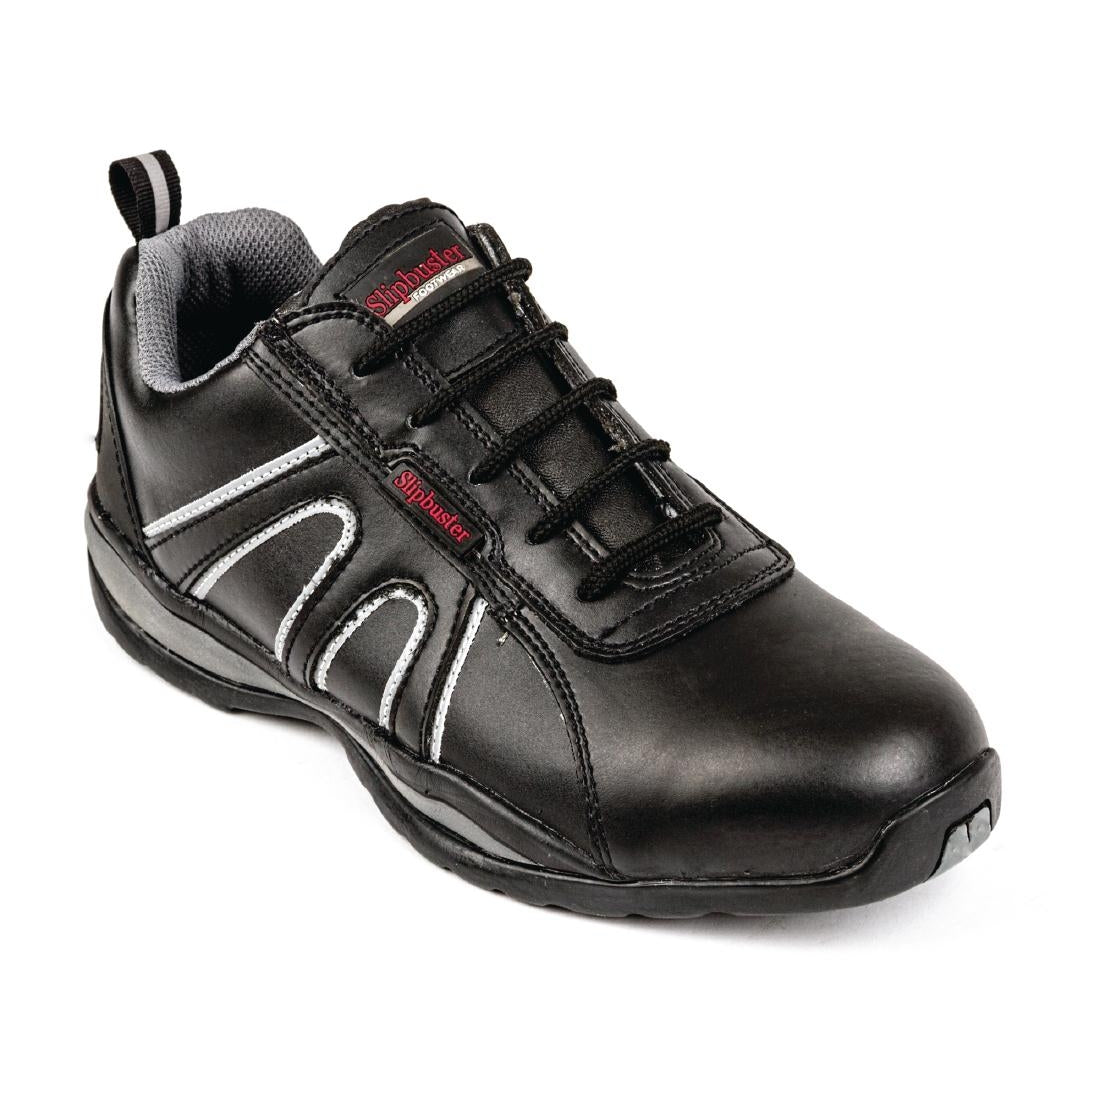 Slipbuster Safety Trainers Black 44